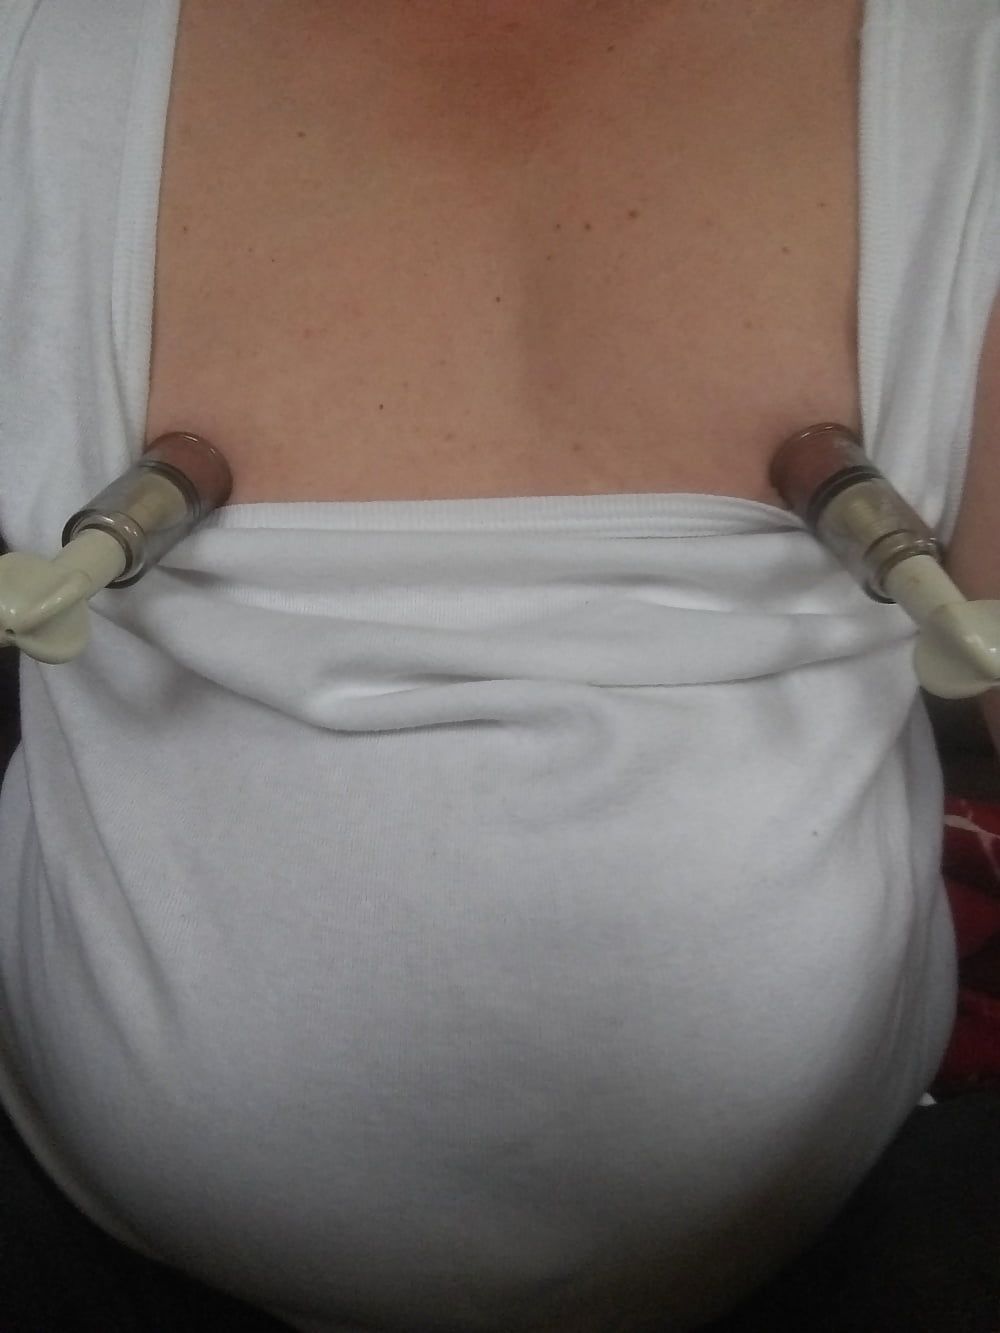 nipples and clamps #7